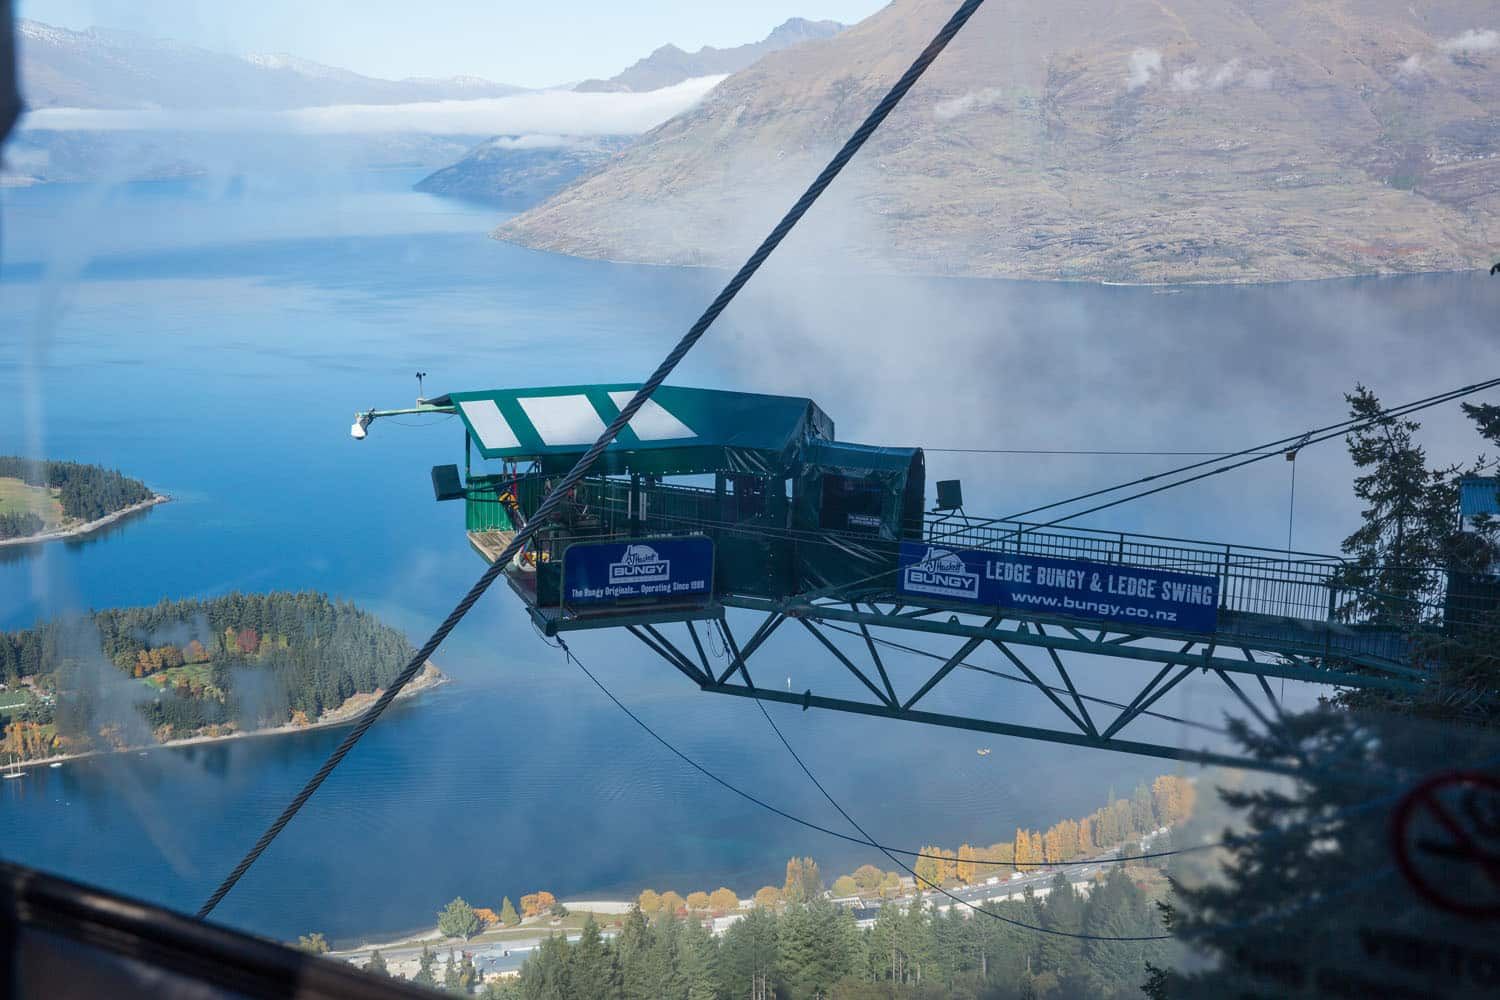 The Ledge Bungy | Queenstown Itinerary